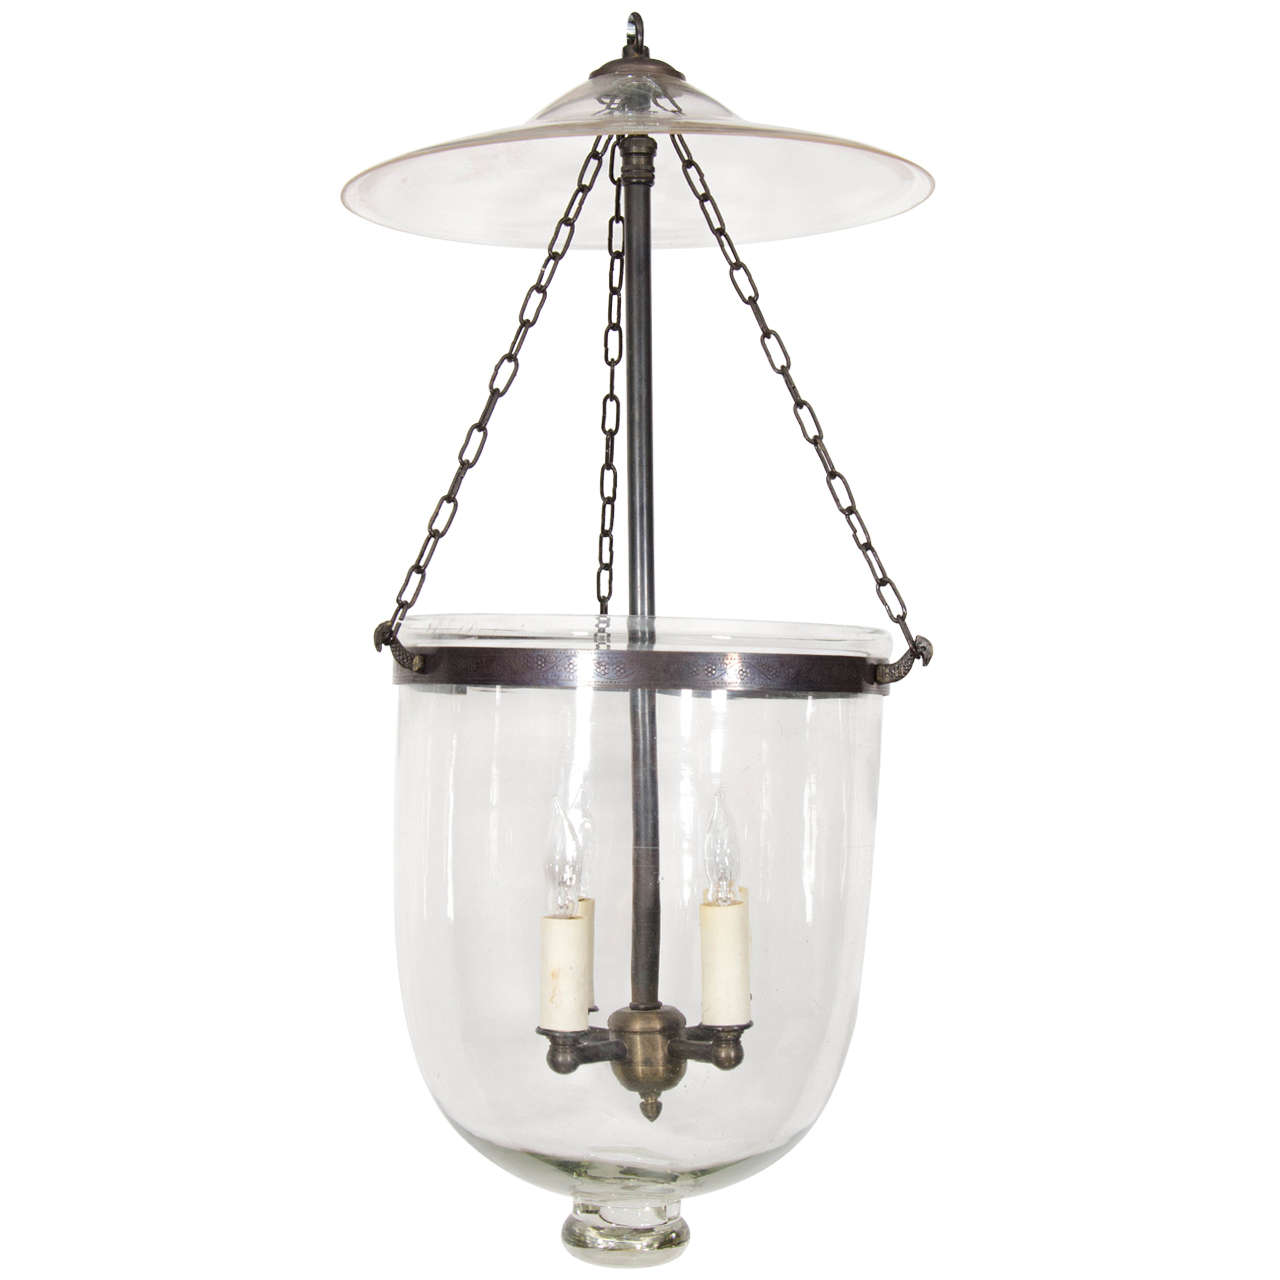 Small Bell Jar Light with Clear Glass